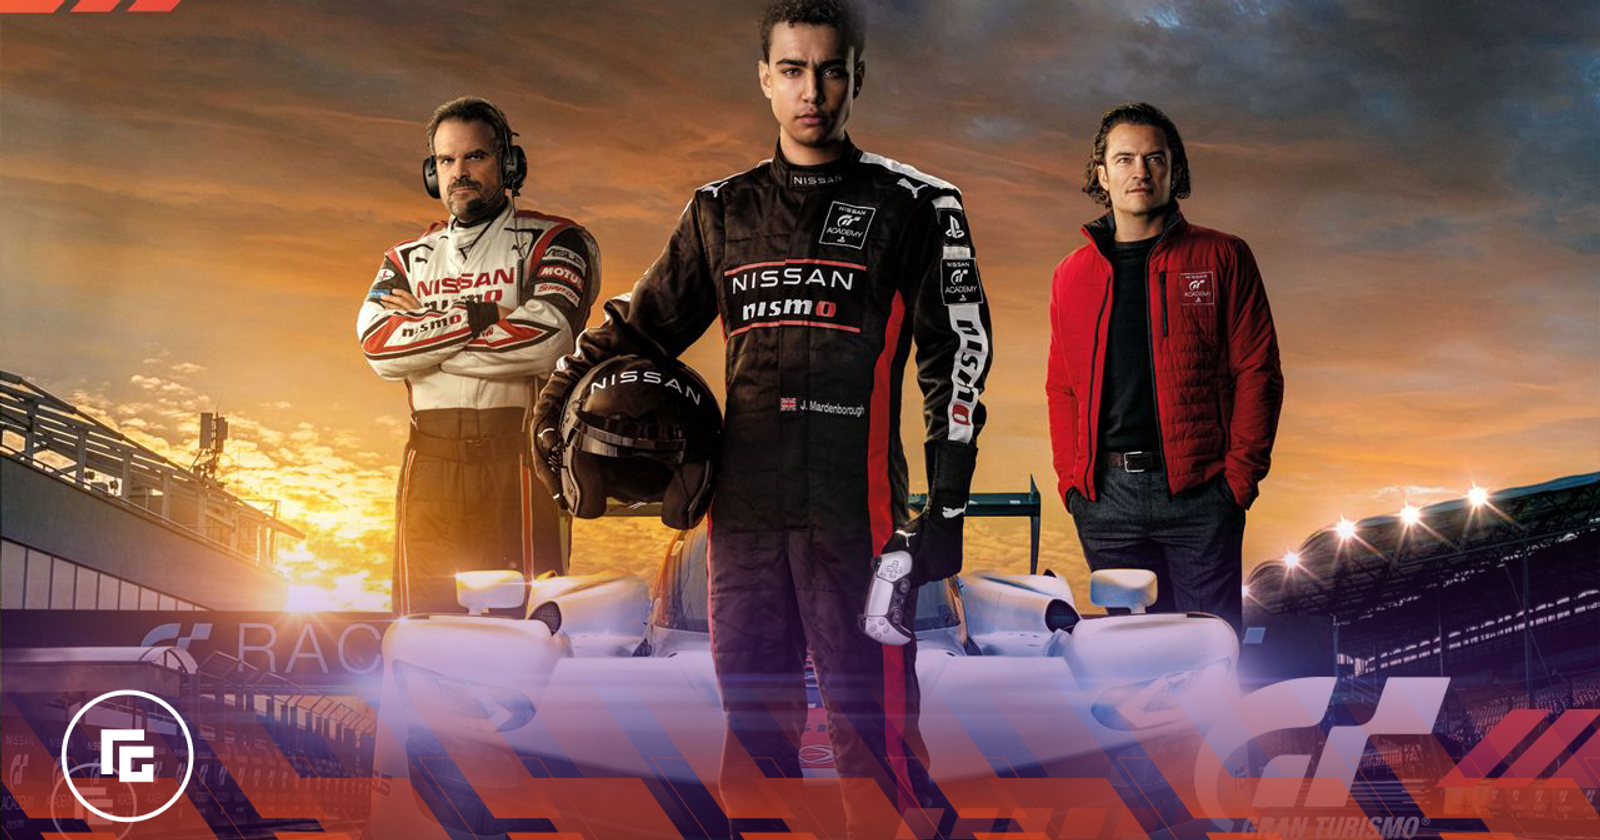 Gran Turismo' movie trailer released, based on Nissan GT Academy